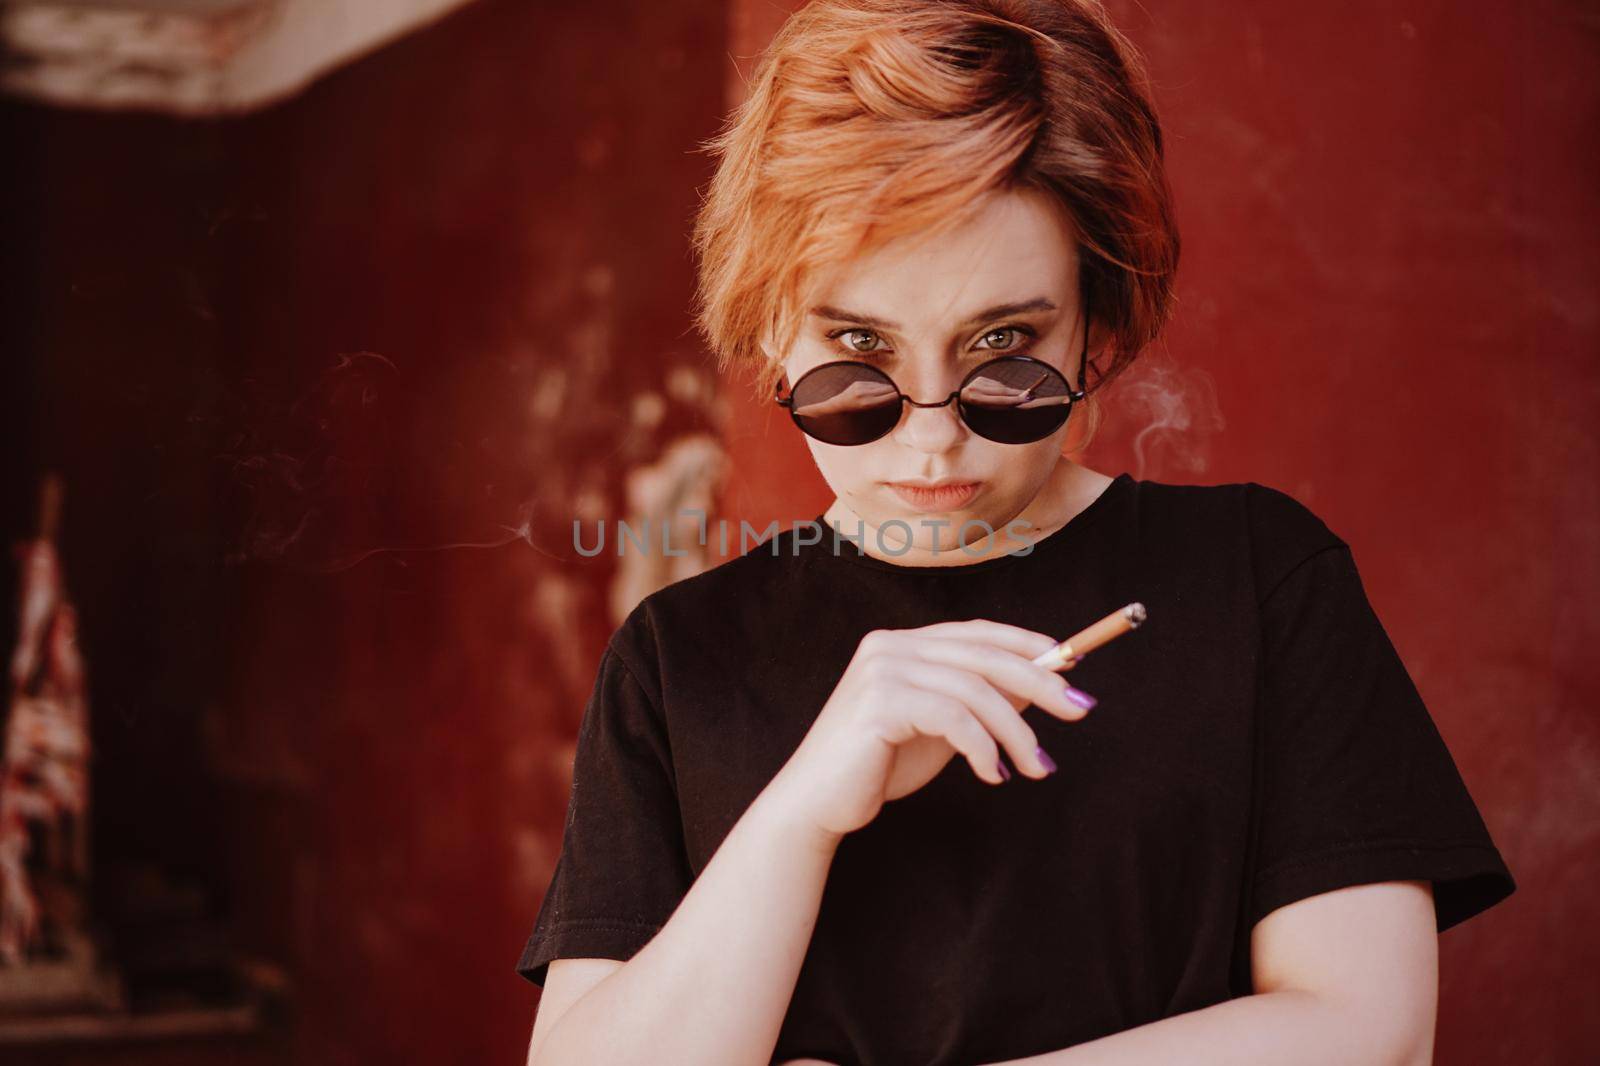 Millennial girl with short red hair and mirror sunglasses smoking cigarette by natali_brill